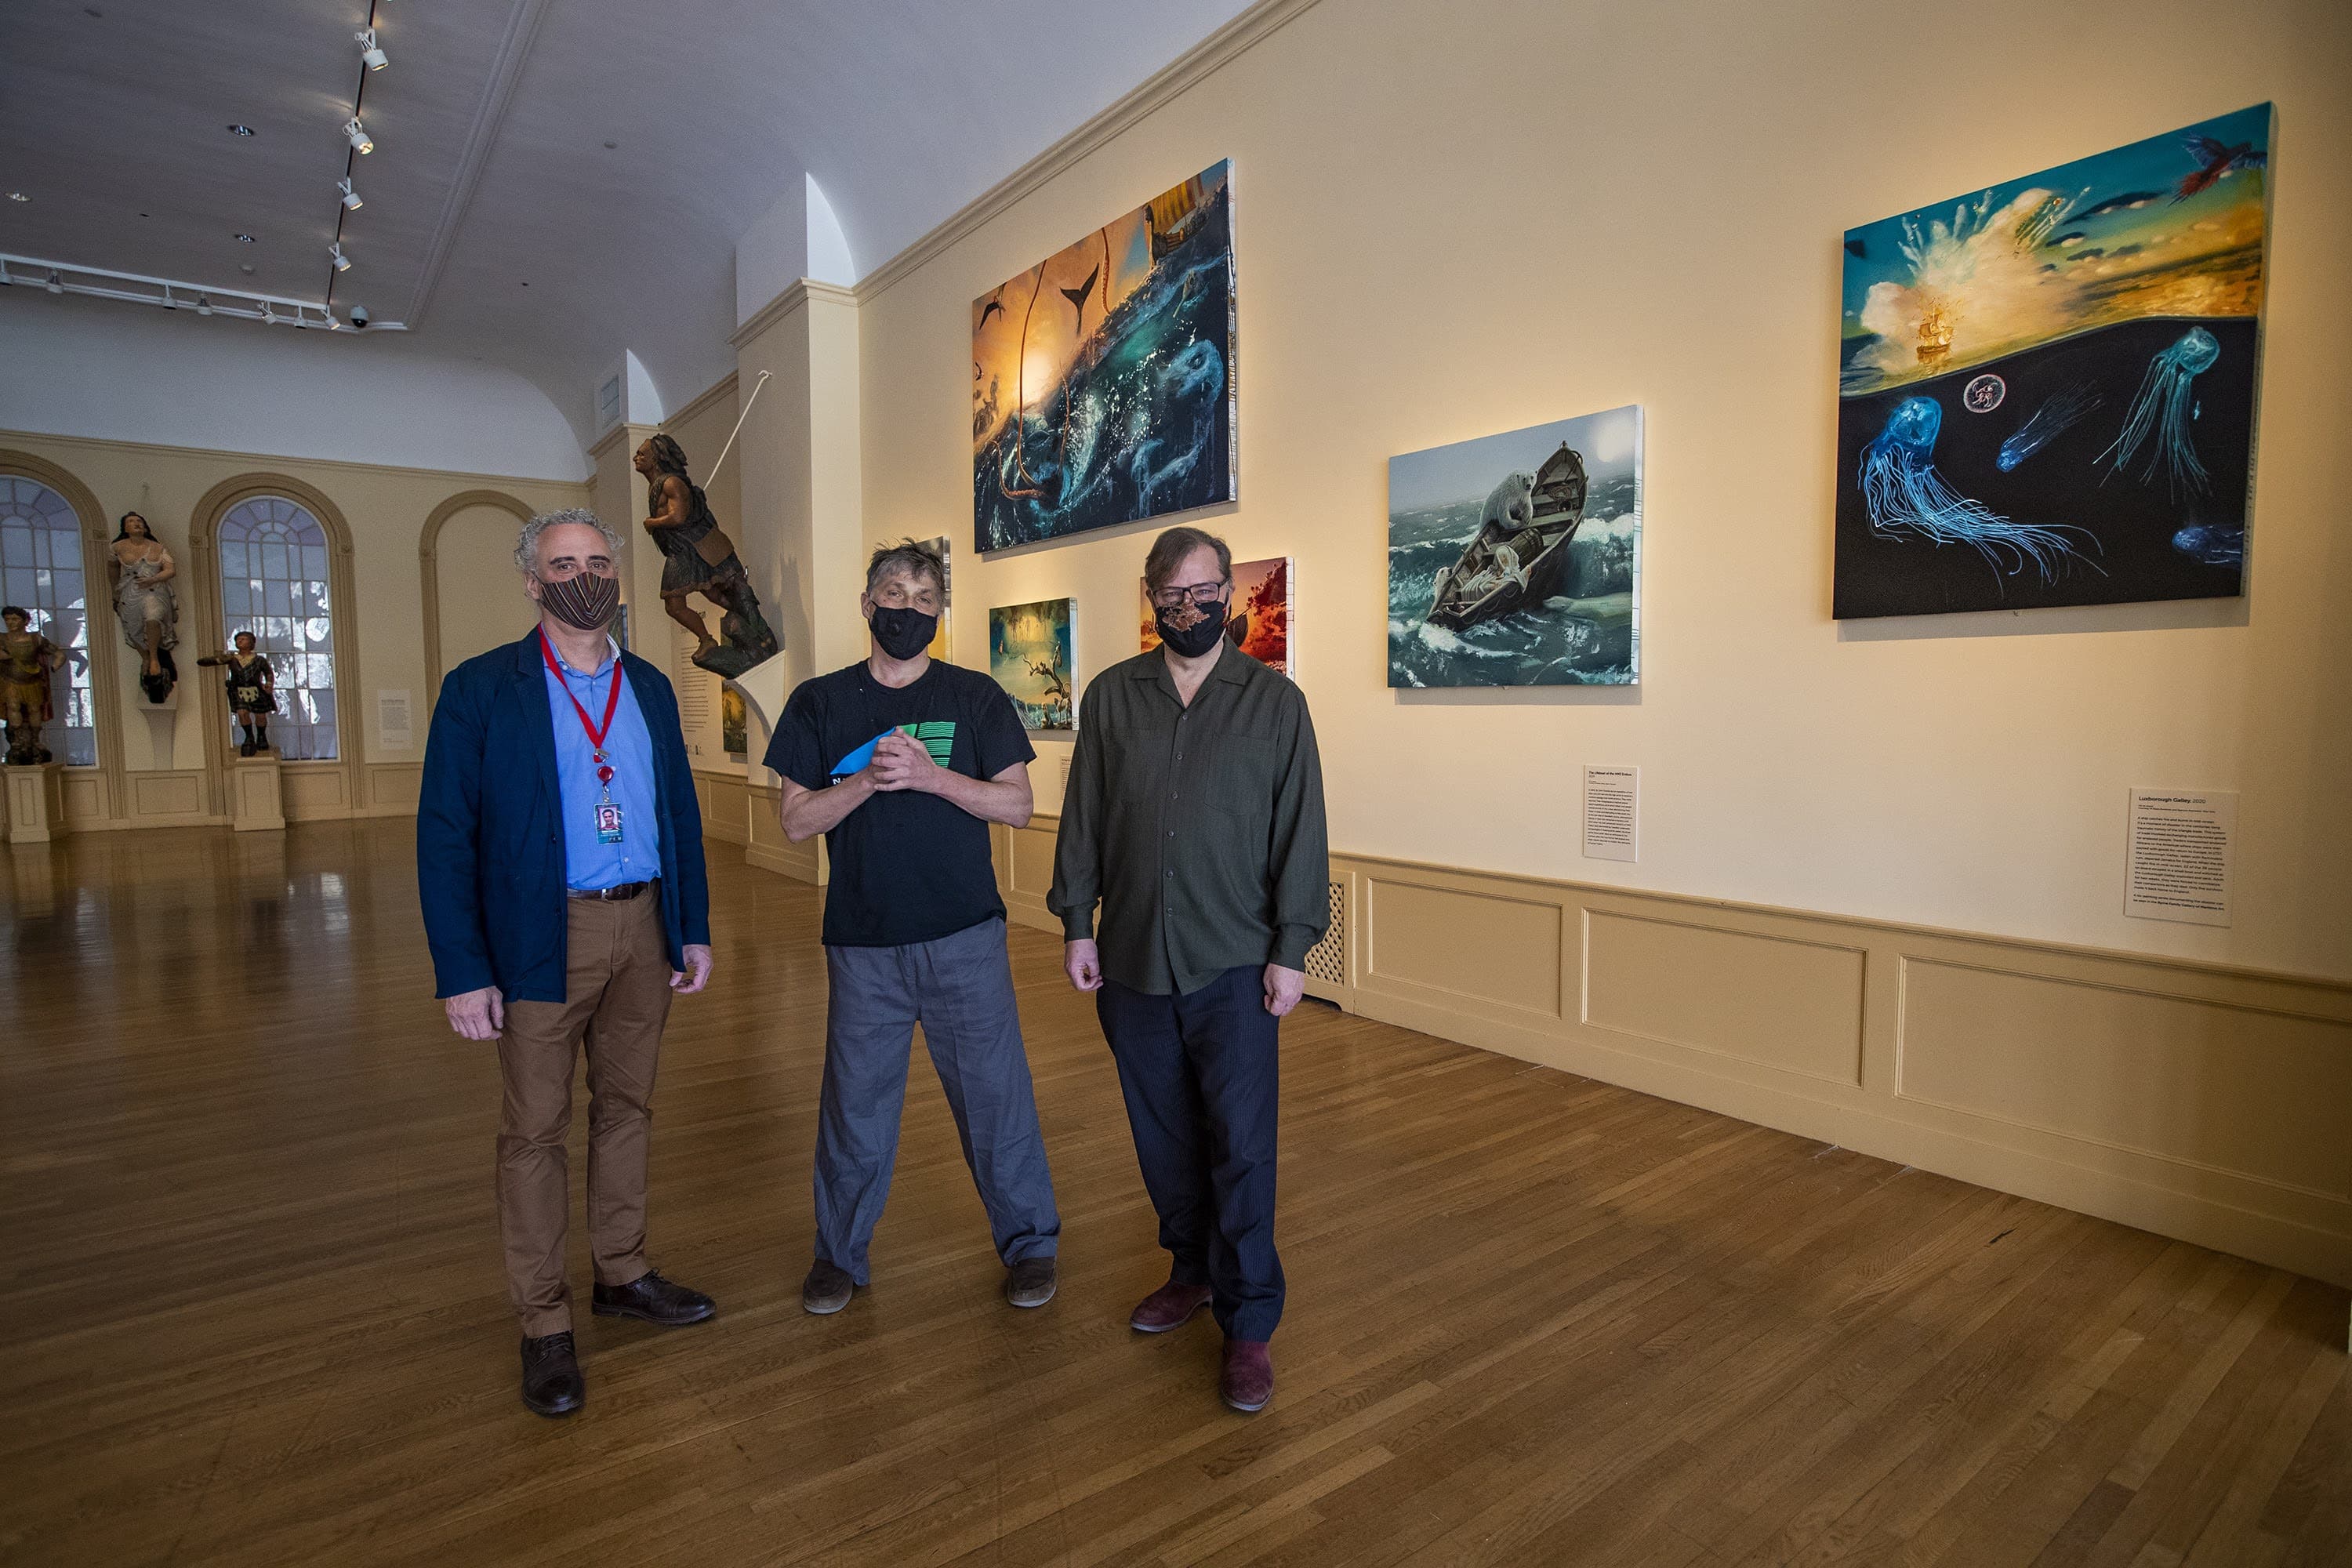 Daniel Finamore, Alexis Rockman, and Trevor Smith standing in front of Rockman’s paintings in the exhibit “Shipwrecks” in the East India Marine Hall at the Peabody Essex Museum. (Jesse Costa/WBUR)